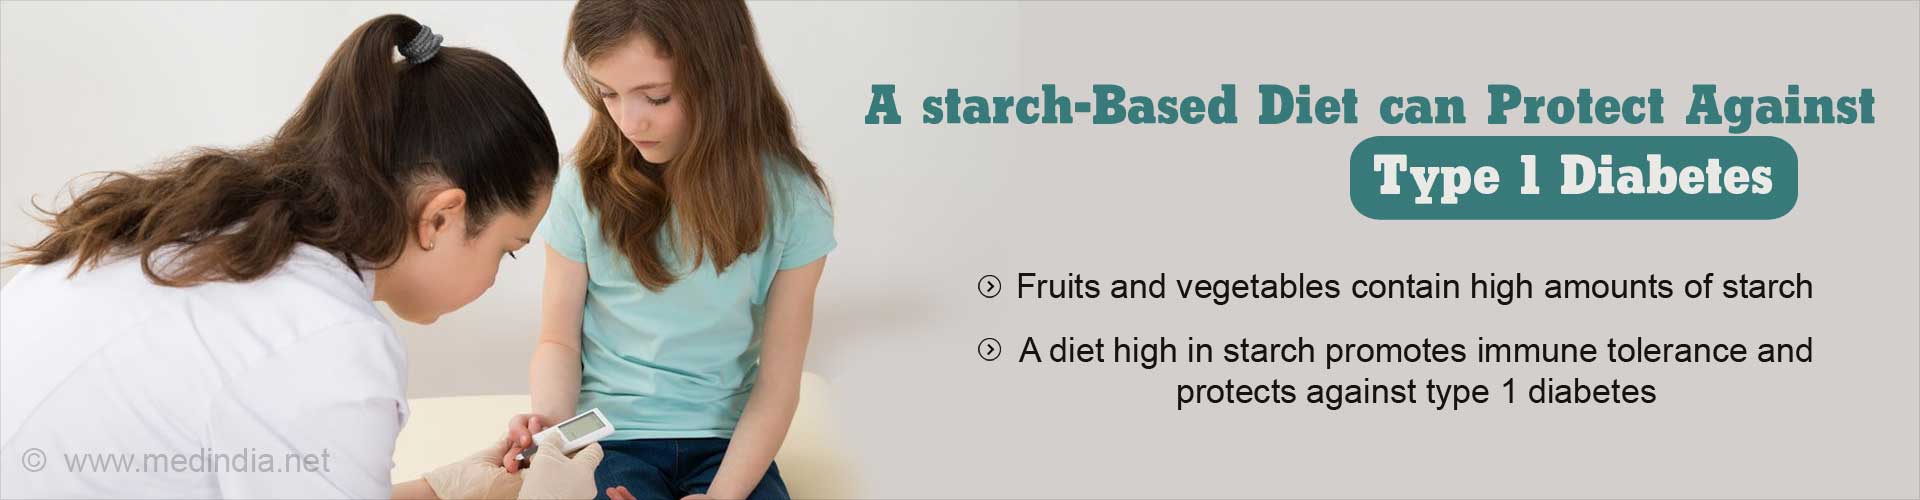 A starch-based diet can protect against type 1 diabetes
- fruits and vegetables contain high amounts of starch
- a diet high in starch promotes immune tolerance an protects against type 1 diabetes